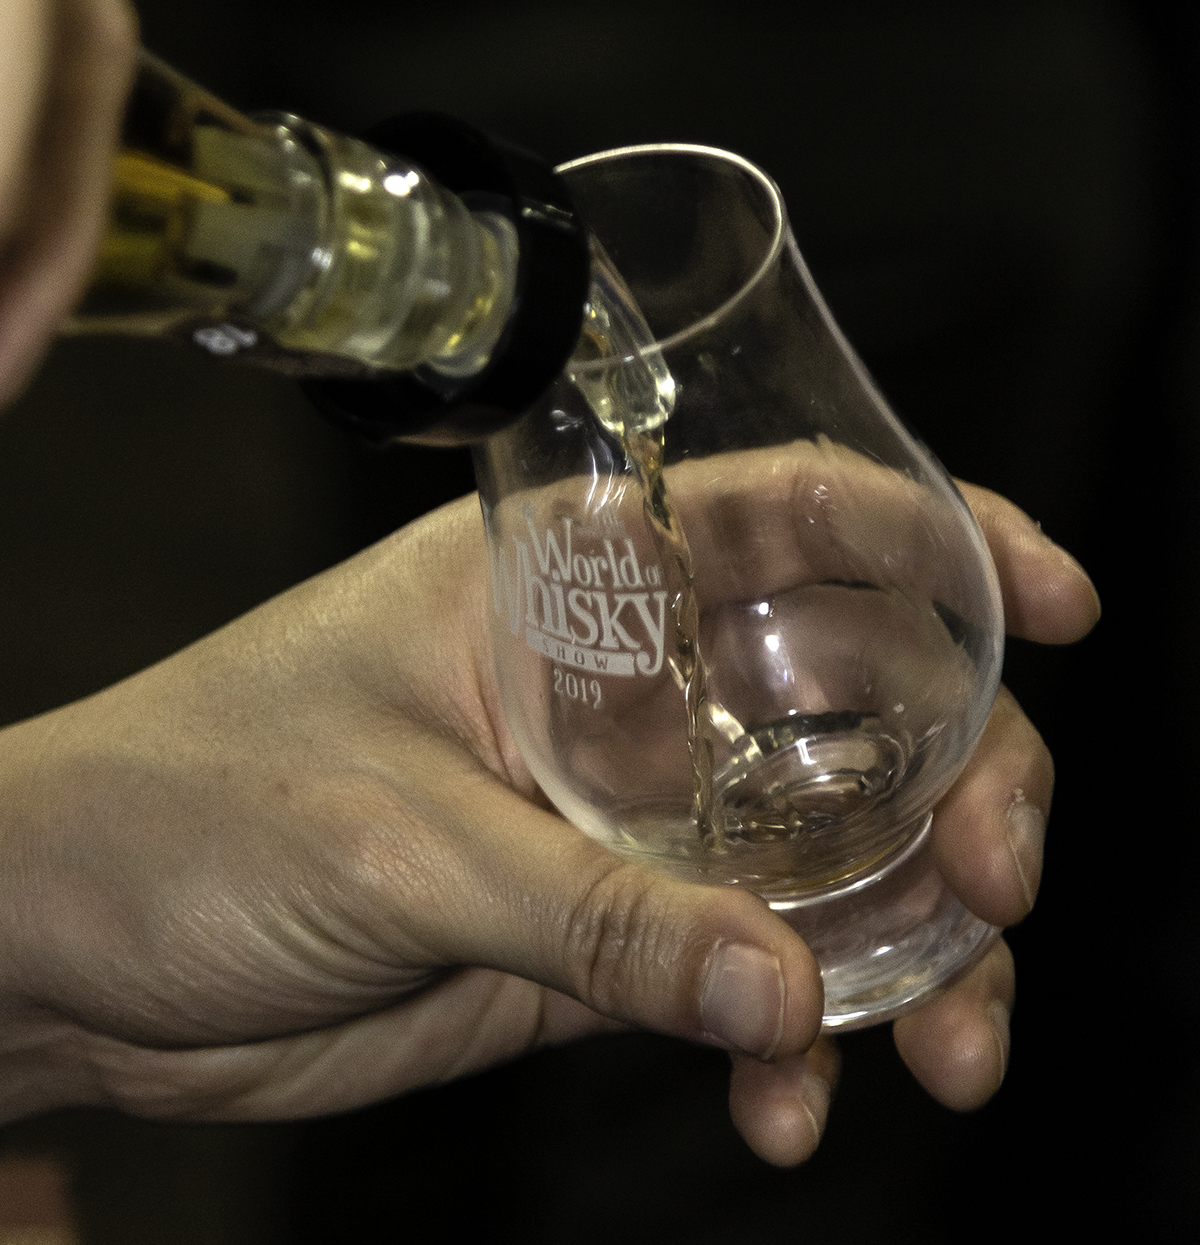 A whisky being poured at the Wonderful World of Whisky Show in Cornwall, Ontario March 23, 2019. Photo ©2019, Mark Gillespie/CaskStrength Media.